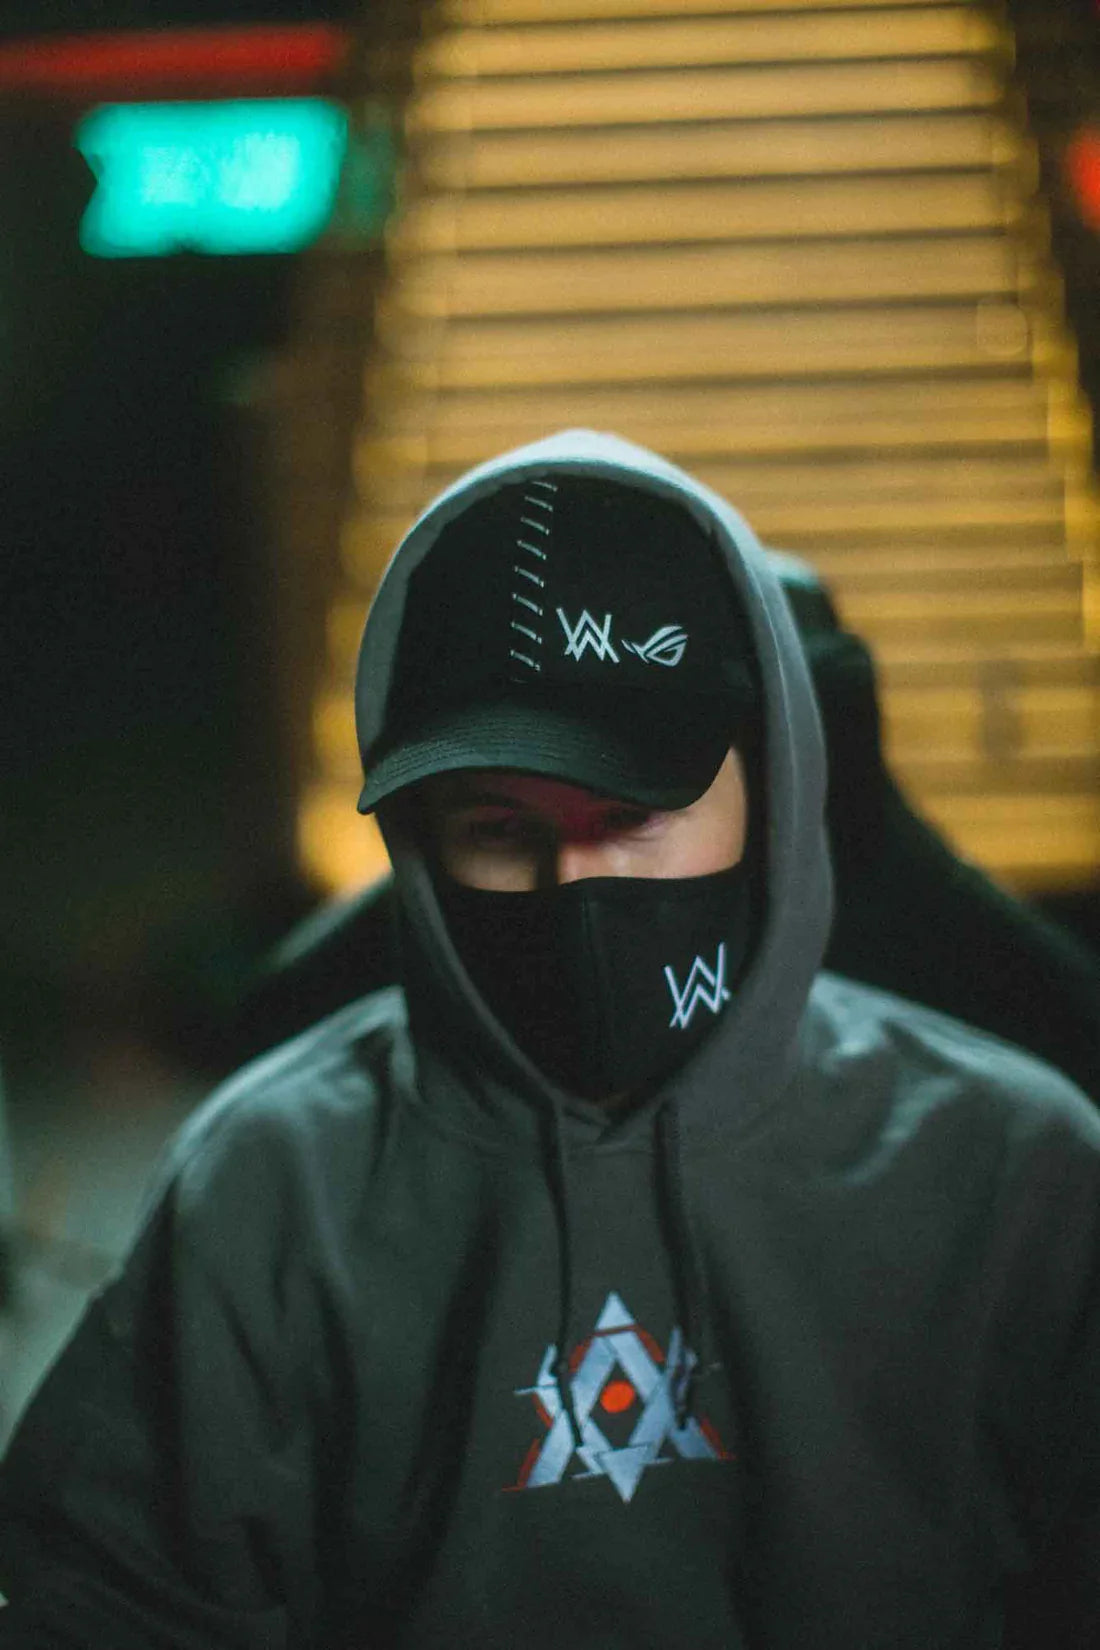 Mysterious figure in a gray Alan Walker Gaming Hoodie and black cap, blending into the urban night, a subtle nod to gamer street fashion.